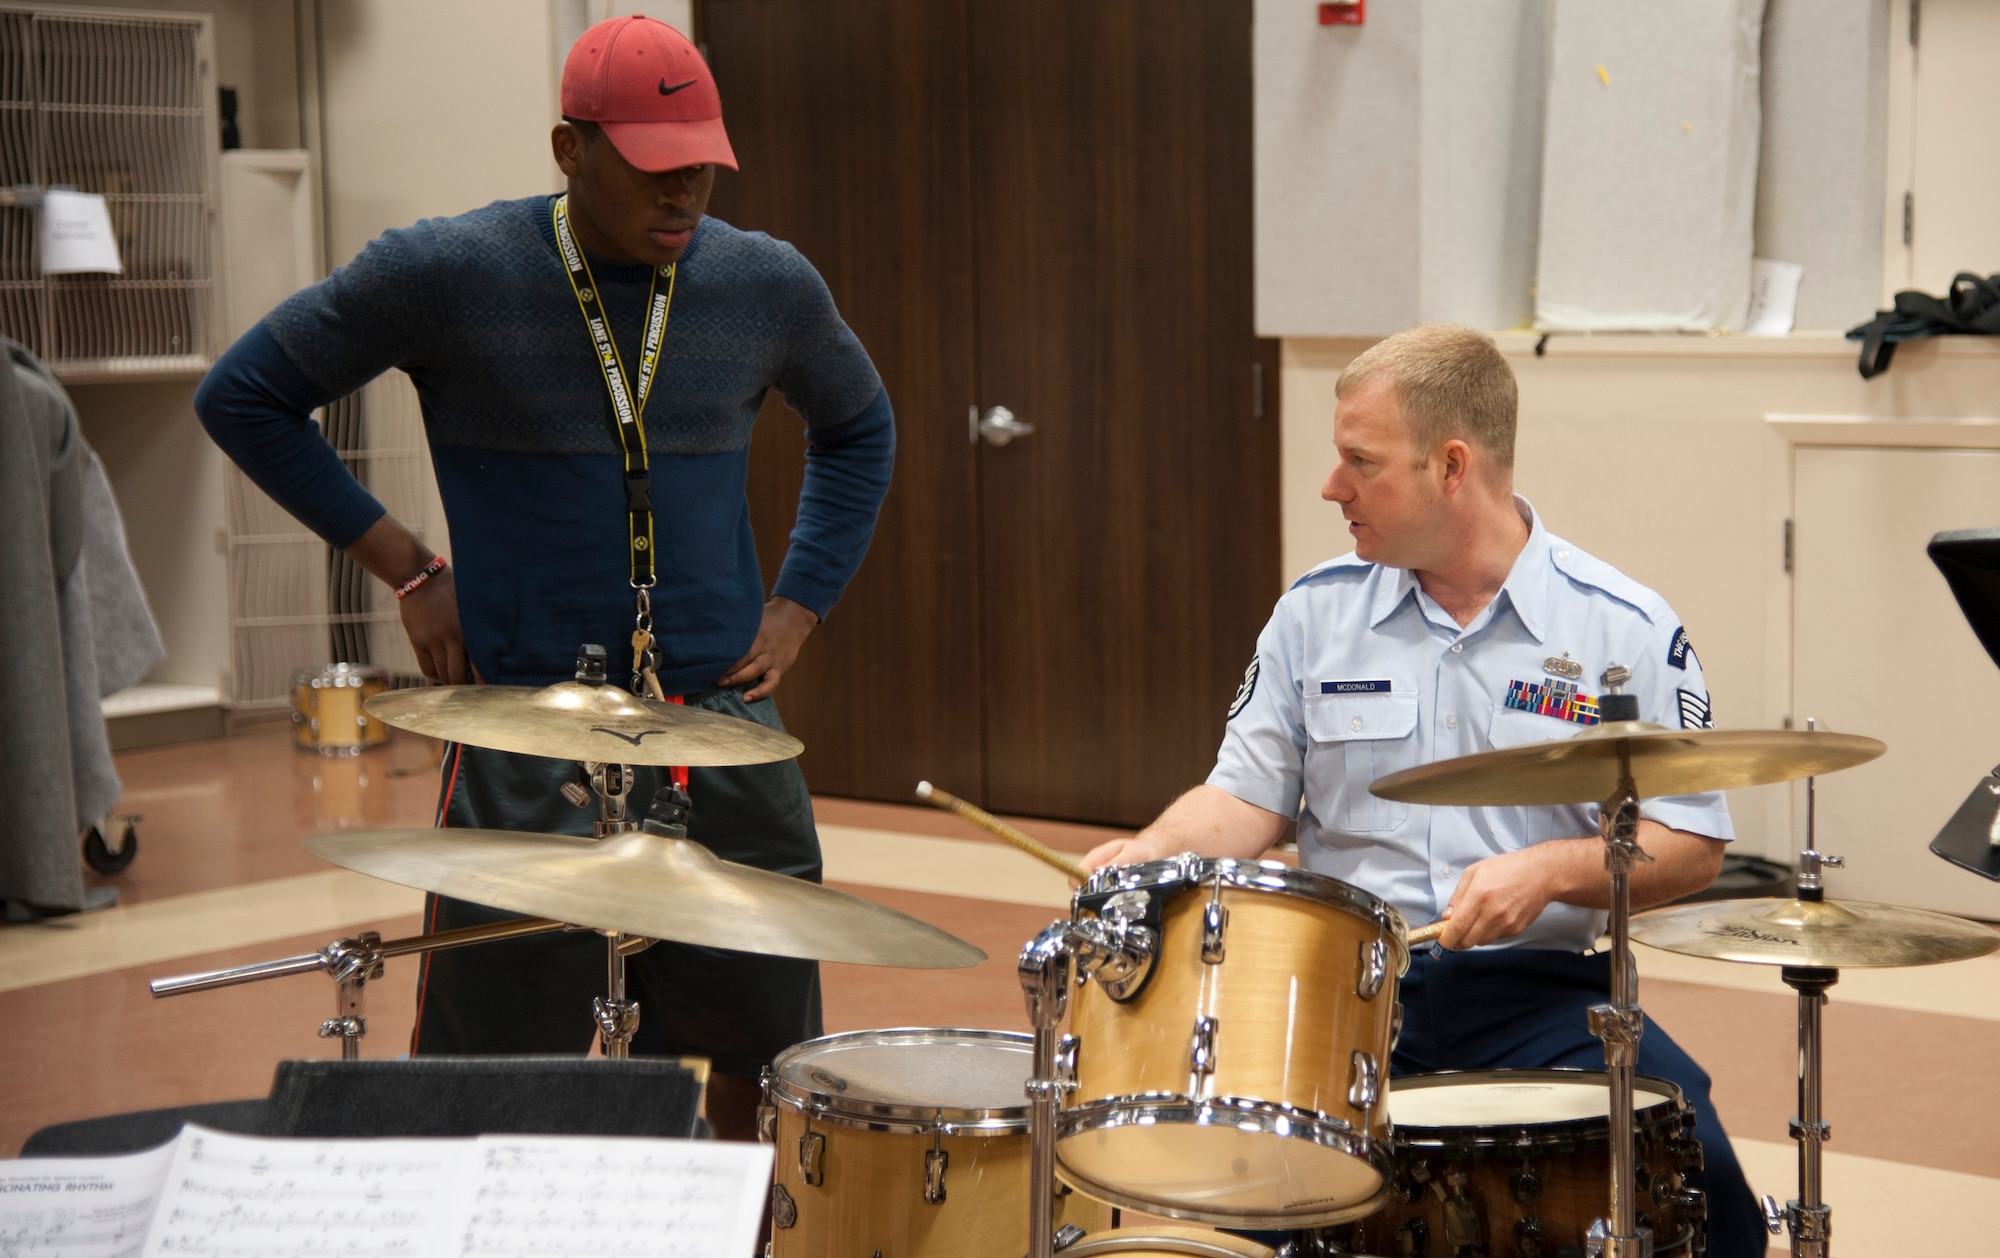 Tech. Sgt. David McDonald, the drummer for the Airmen of Note, the Air Force’s premiere jazz ensemble, teaches a drummer for the Lamar University Jazz Band, some new techniques during an Advancing Innovation through Music Outreach at Lamar University, Beaumont, Texas, April 25. (U.S. Air Force photo by Tech. Sgt. James Bolinger)